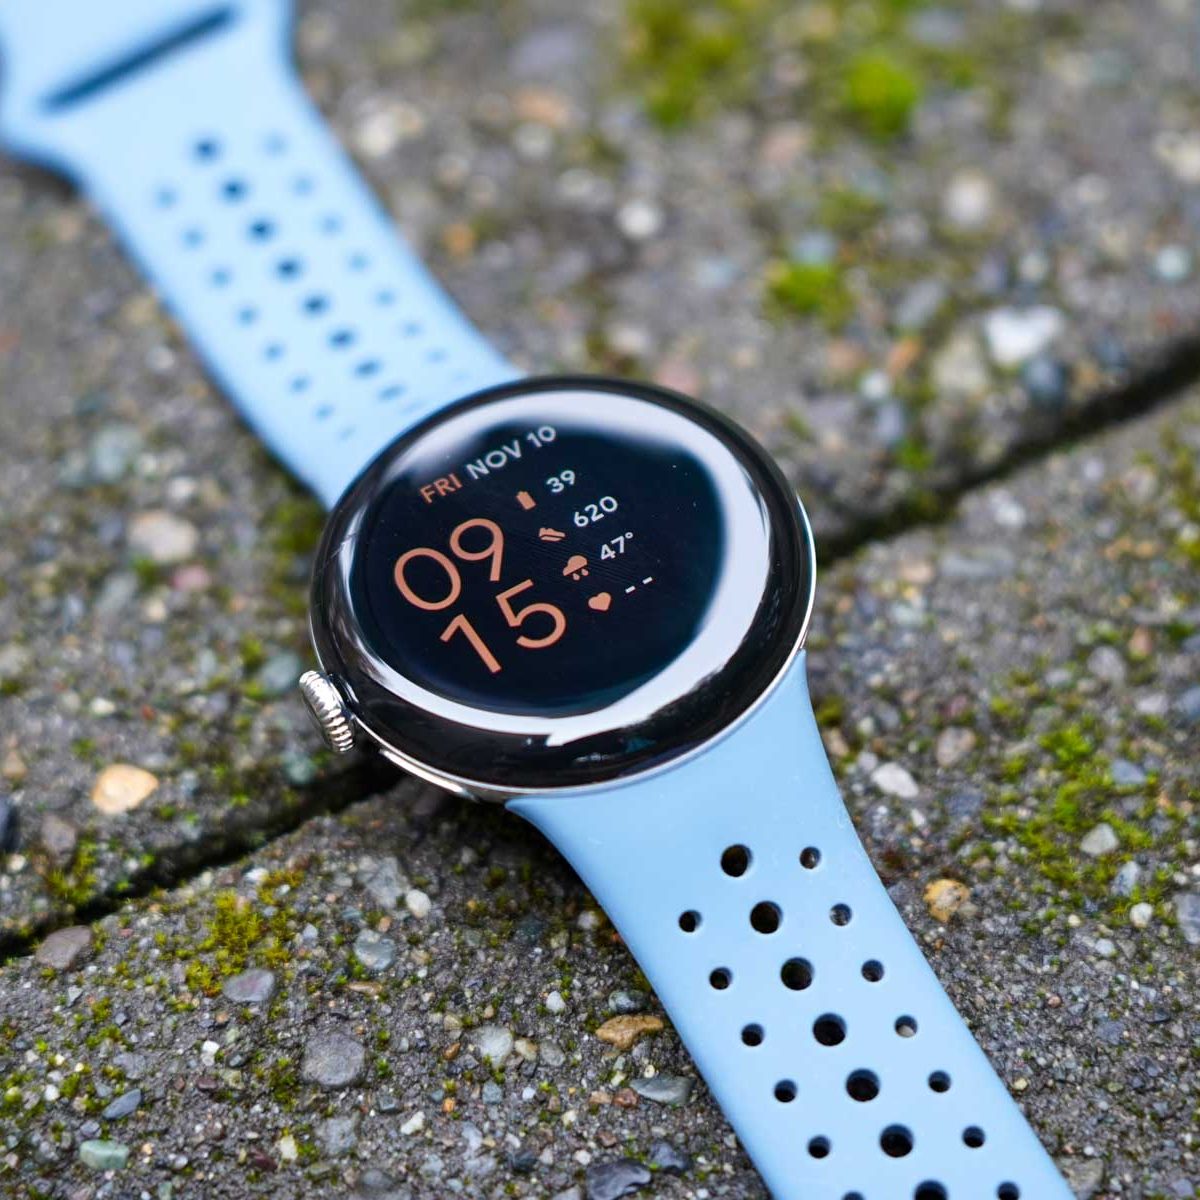 Samsung Galaxy Fit 2 Review